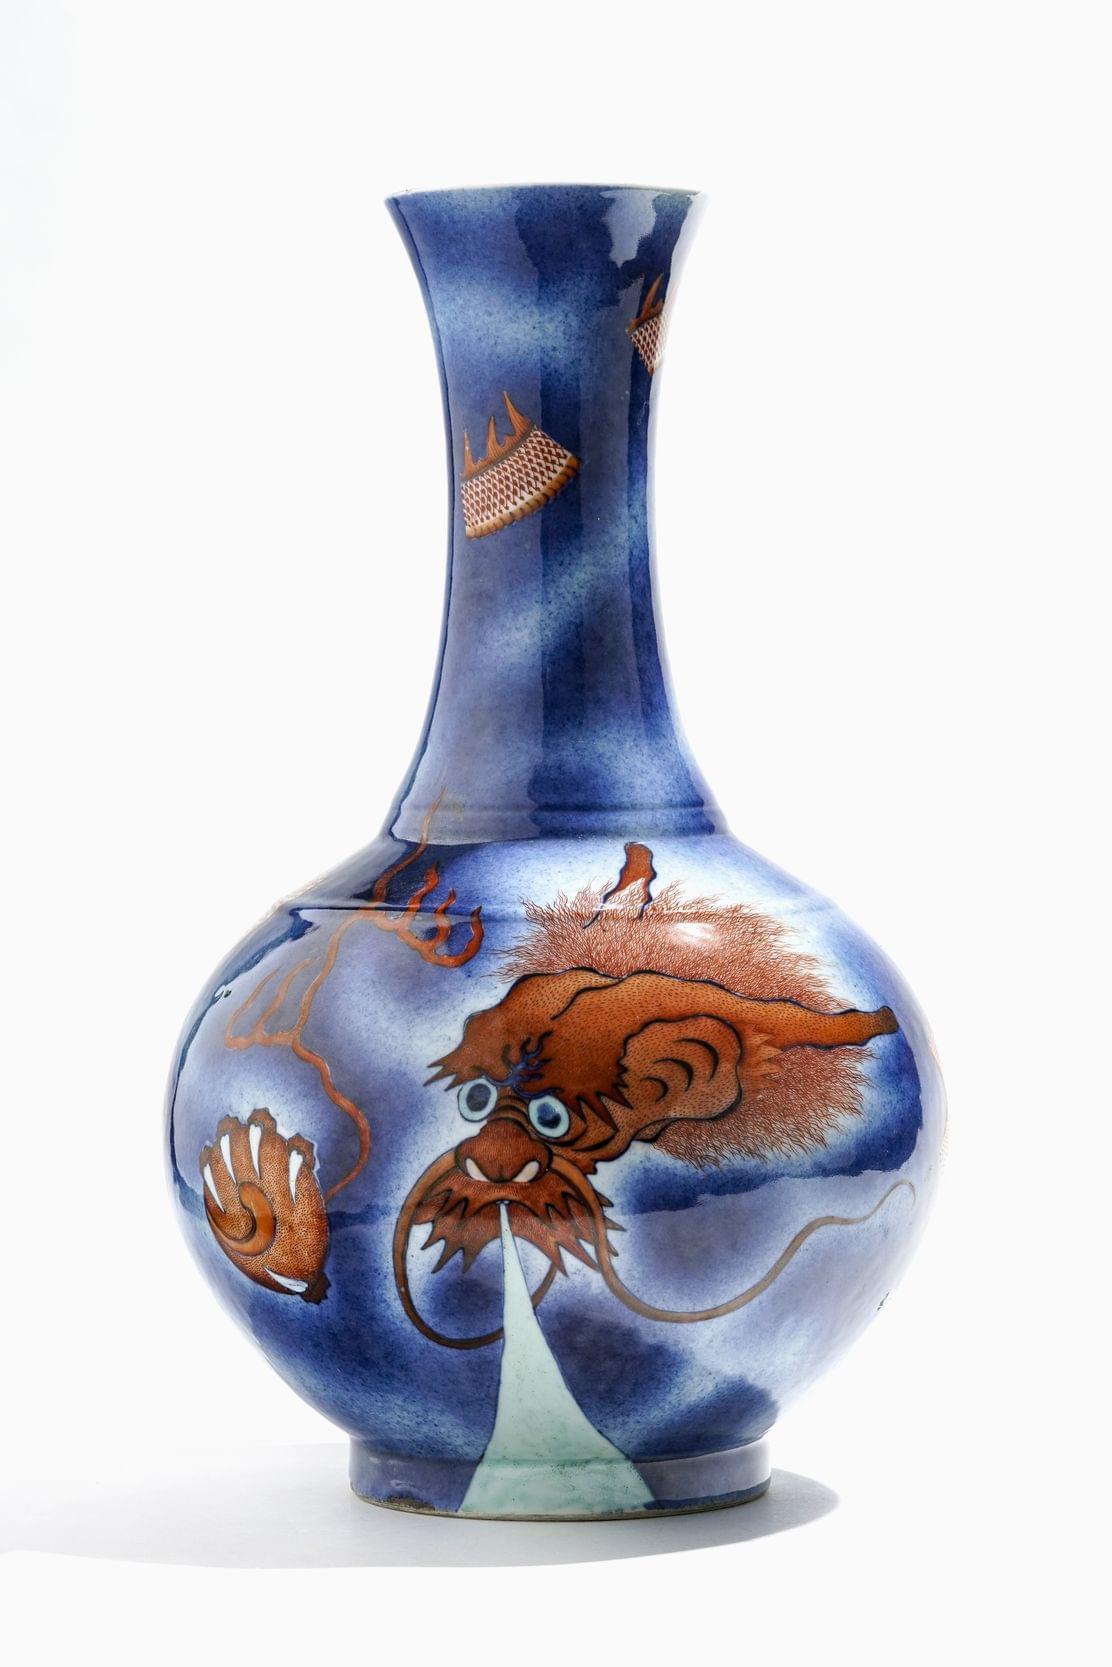 Vase tianqiuping, Chine, dynastie Qing (1644-1912), marque Daoguang (1821-1850)